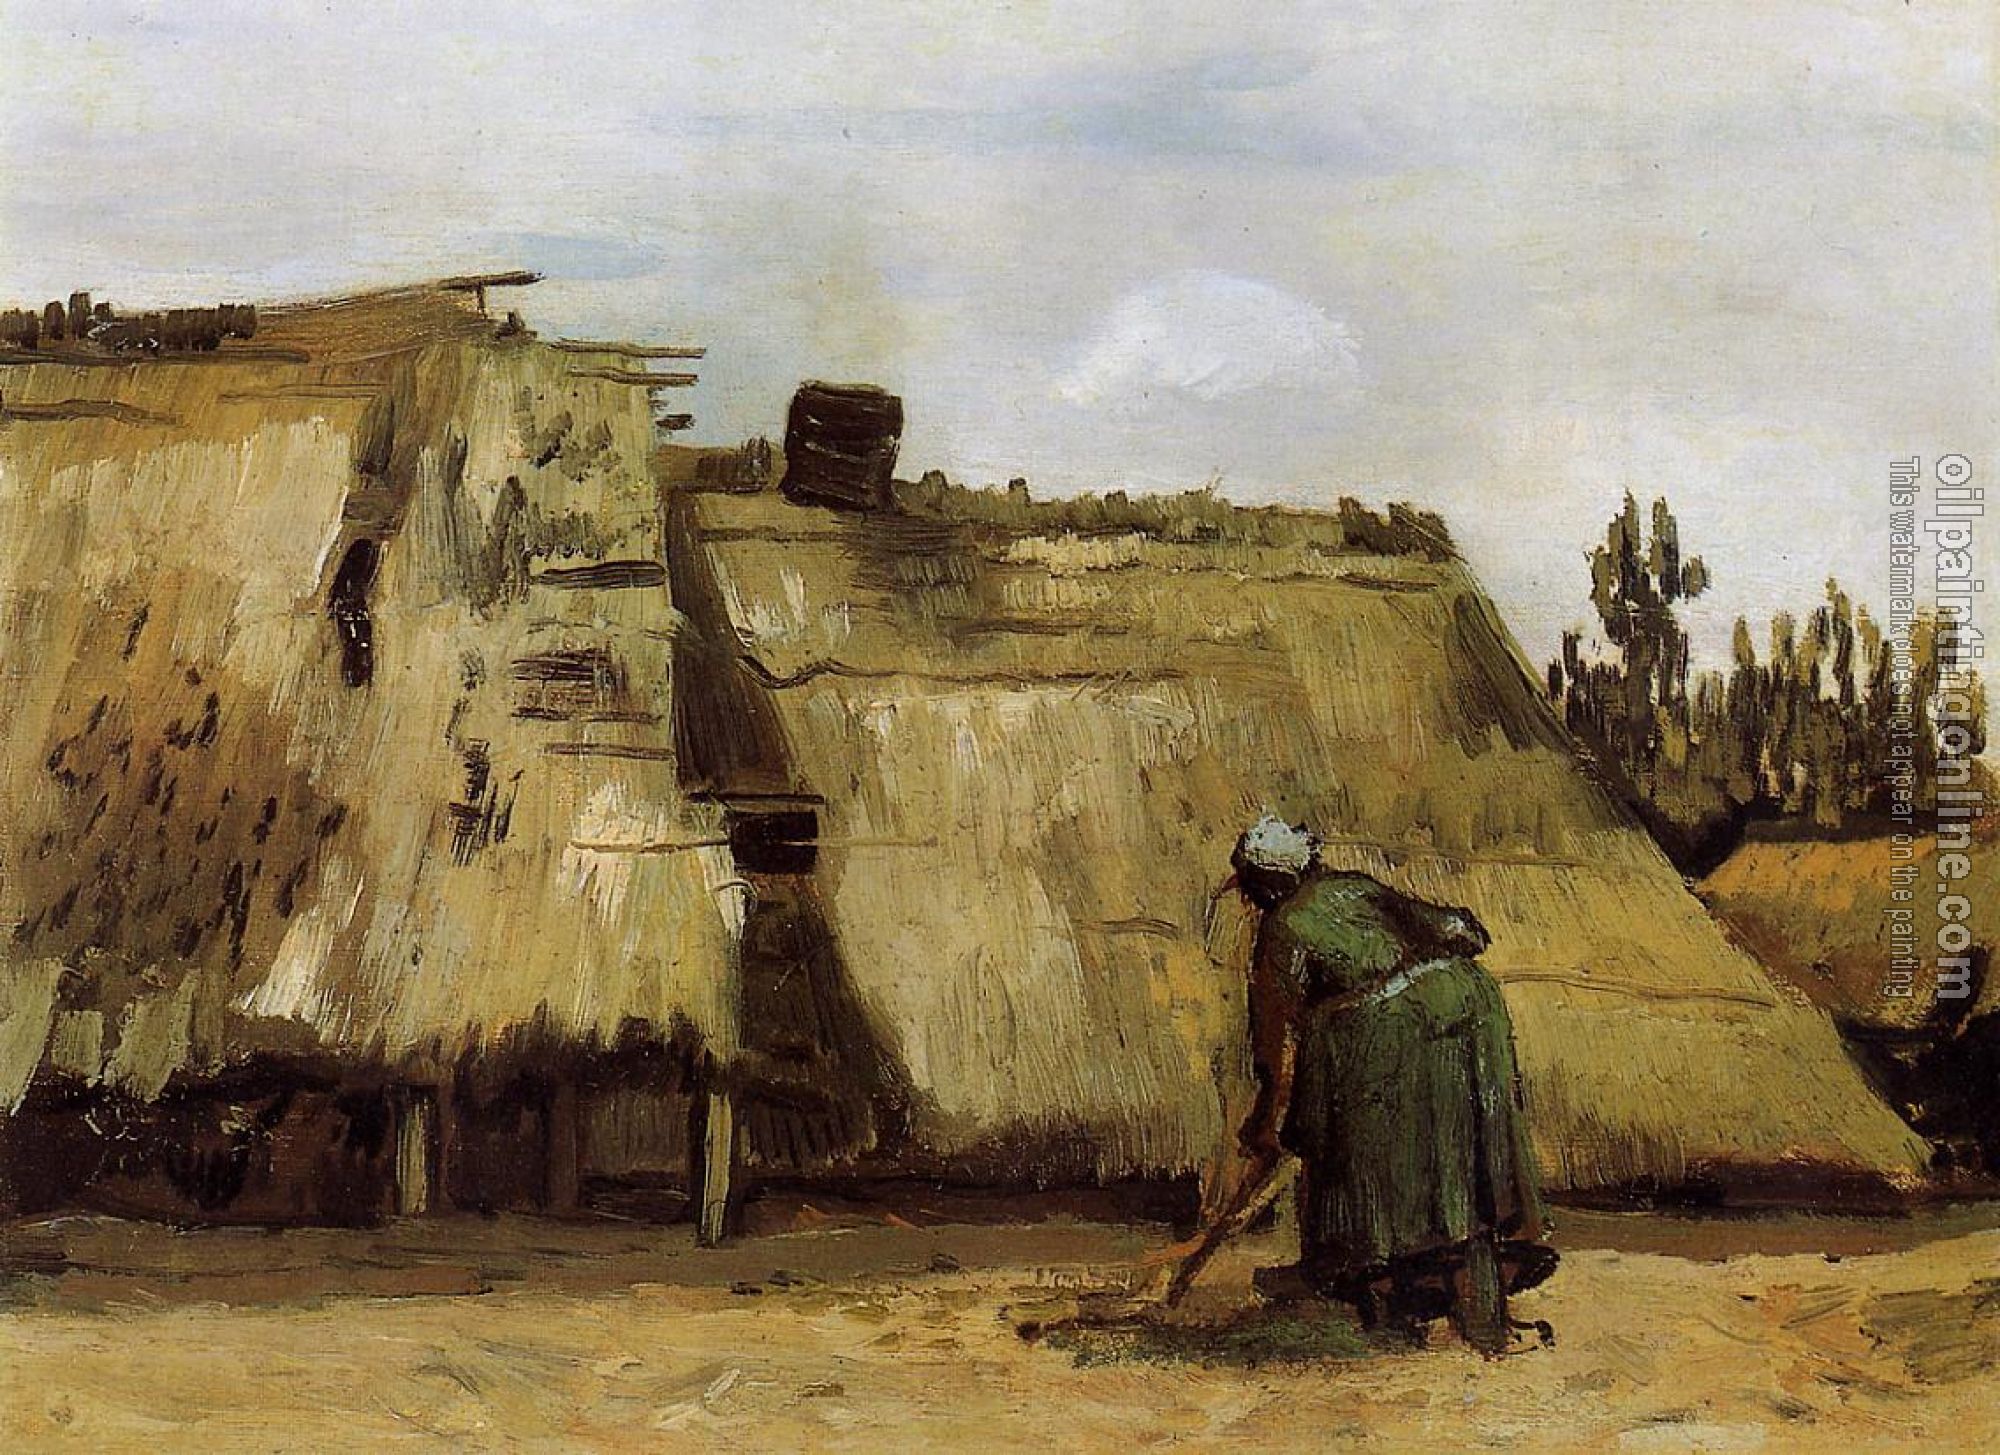 Gogh, Vincent van - Cottage with Woman Digging